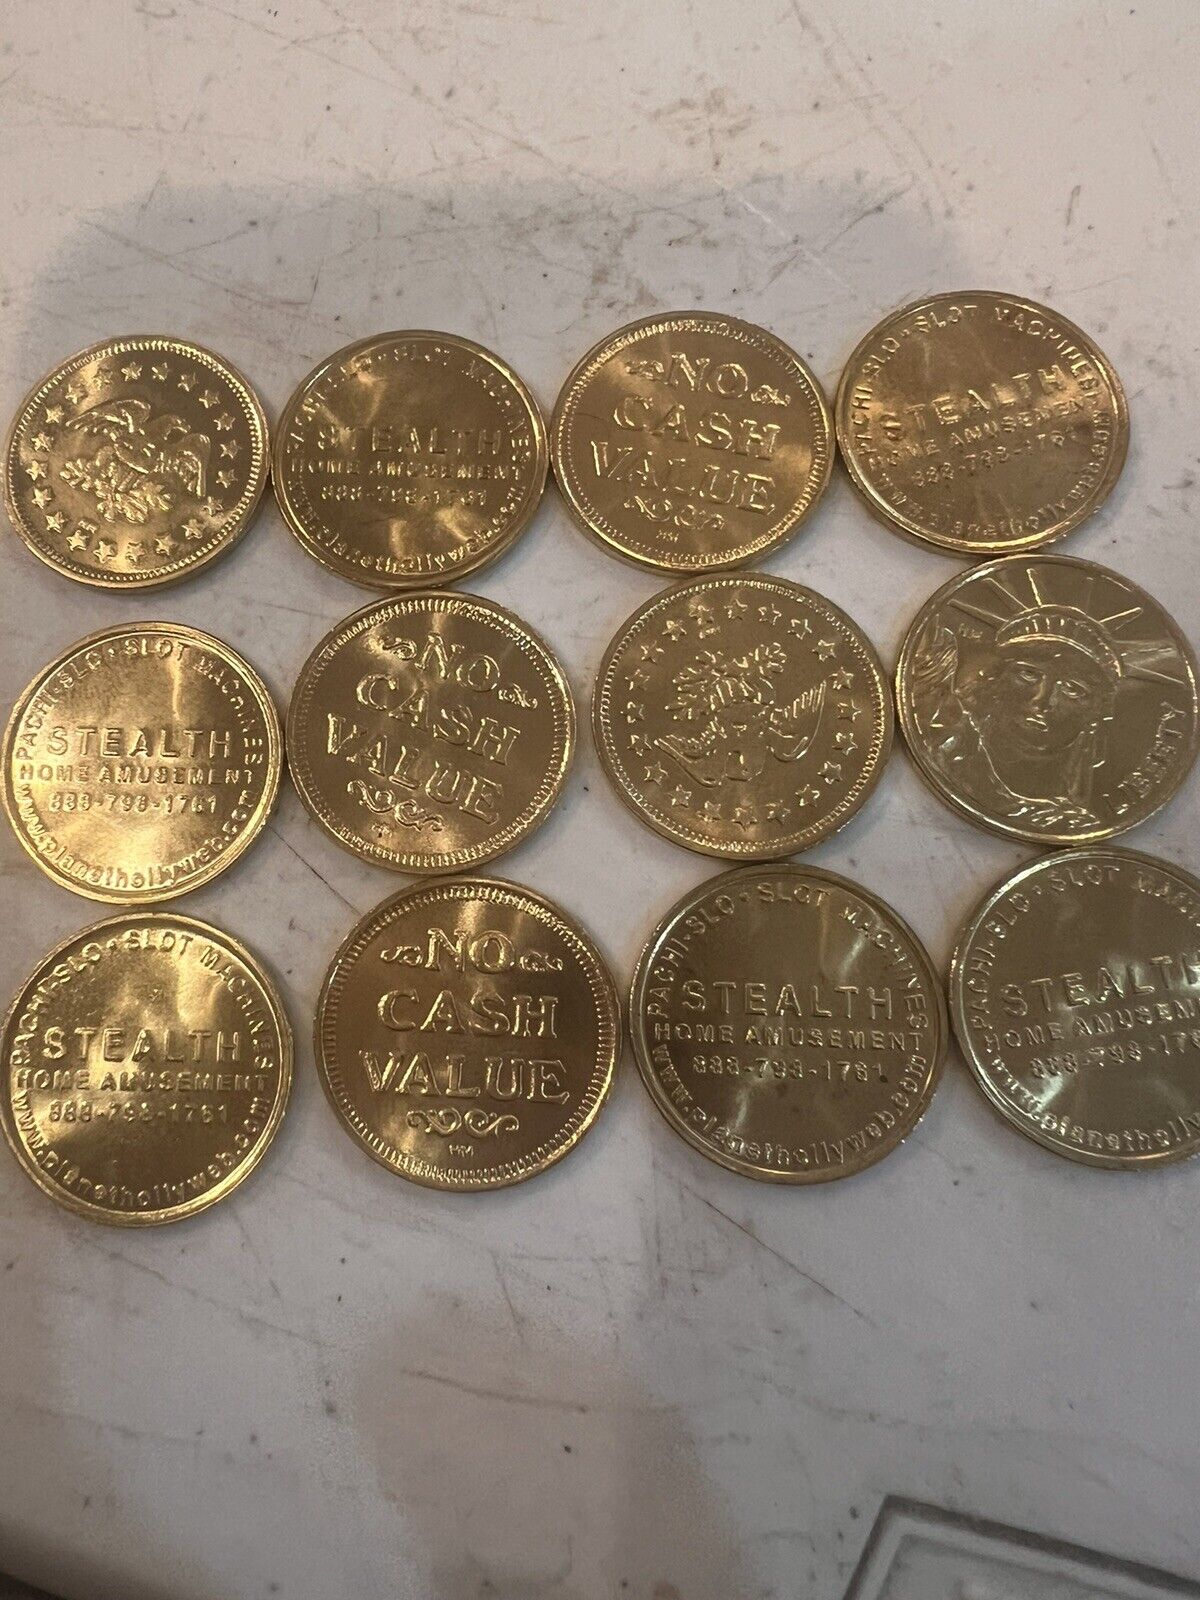 BRAND NEW 100 GOLD TONE AUTHENTIC PACHISLO SLOT MACHINE TOKENS NEW 1 LOT OF 100